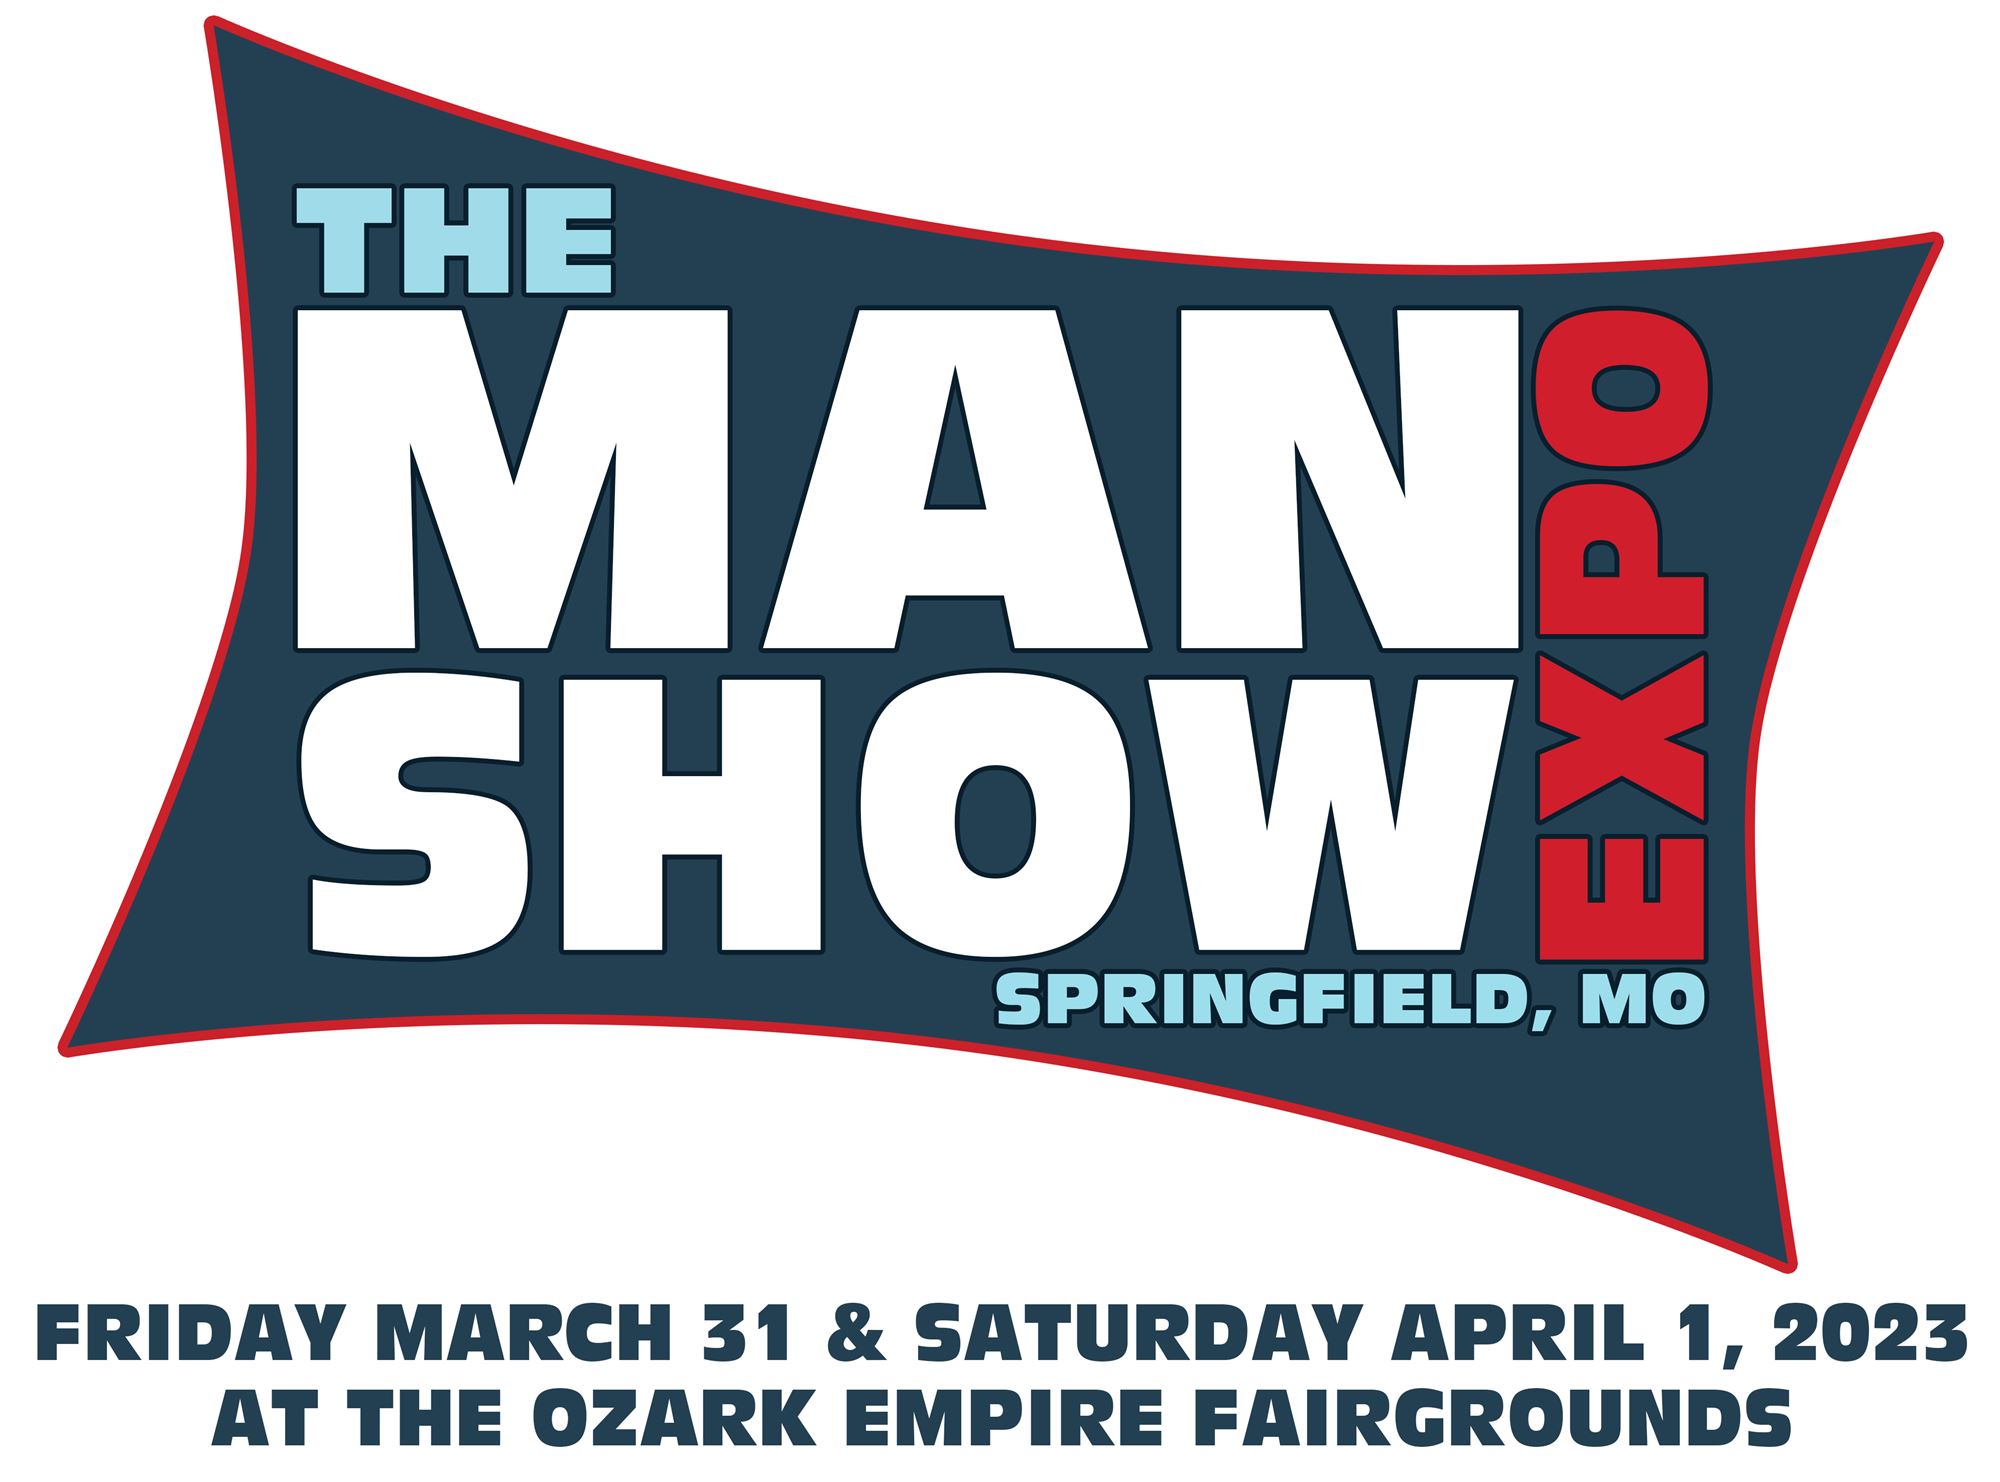 The Man Show Expo